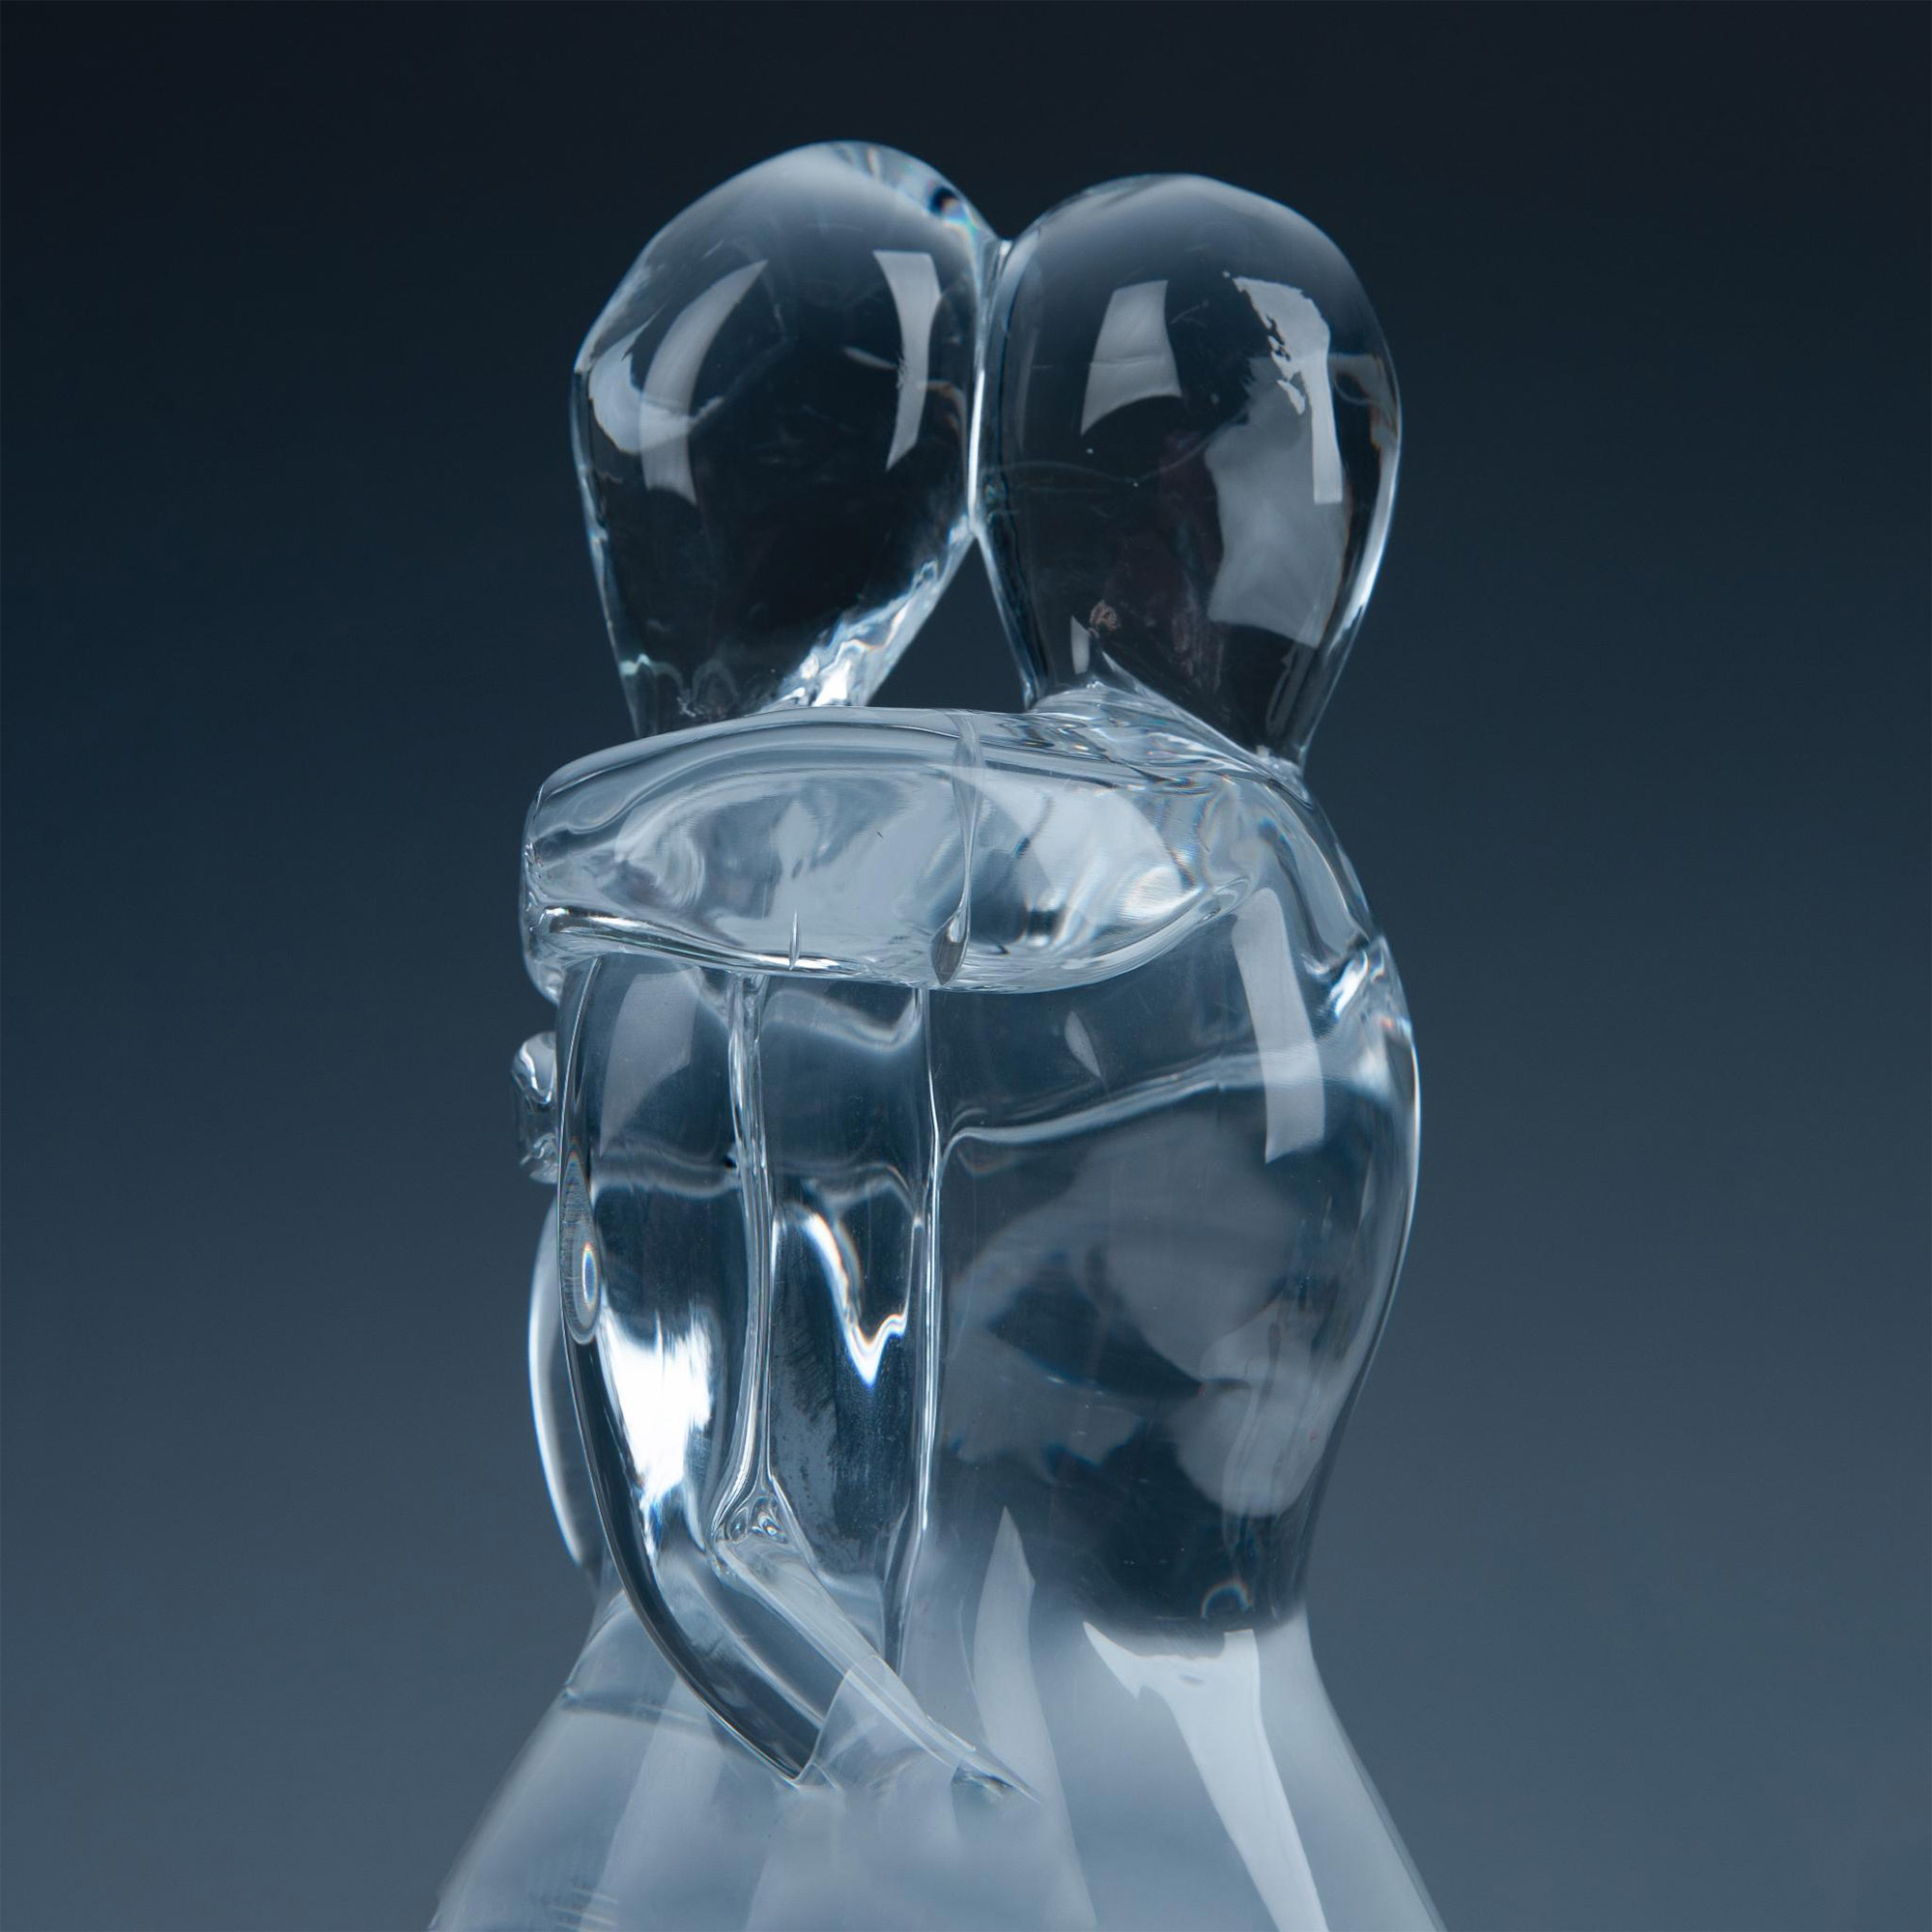 Murano Glass Sculpture by Renato Anatra, Two Lovers - Image 4 of 5